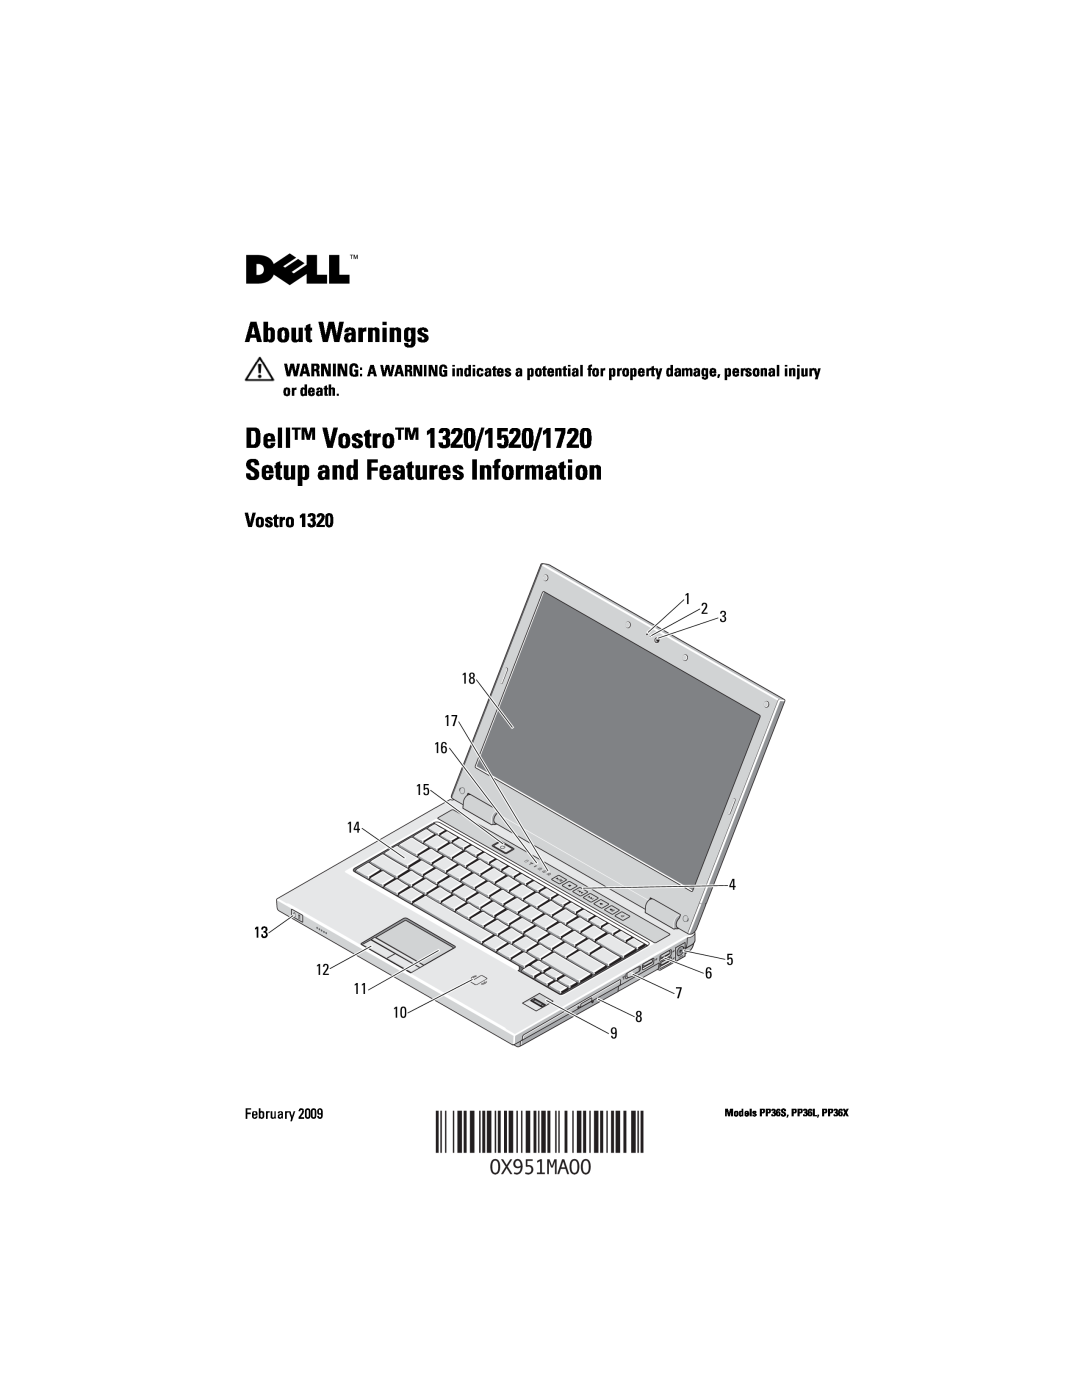 Dell manual About Warnings, Dell Vostro 1320/1520/1720 Setup and Features Information, Models PP36S, PP36L, PP36X 